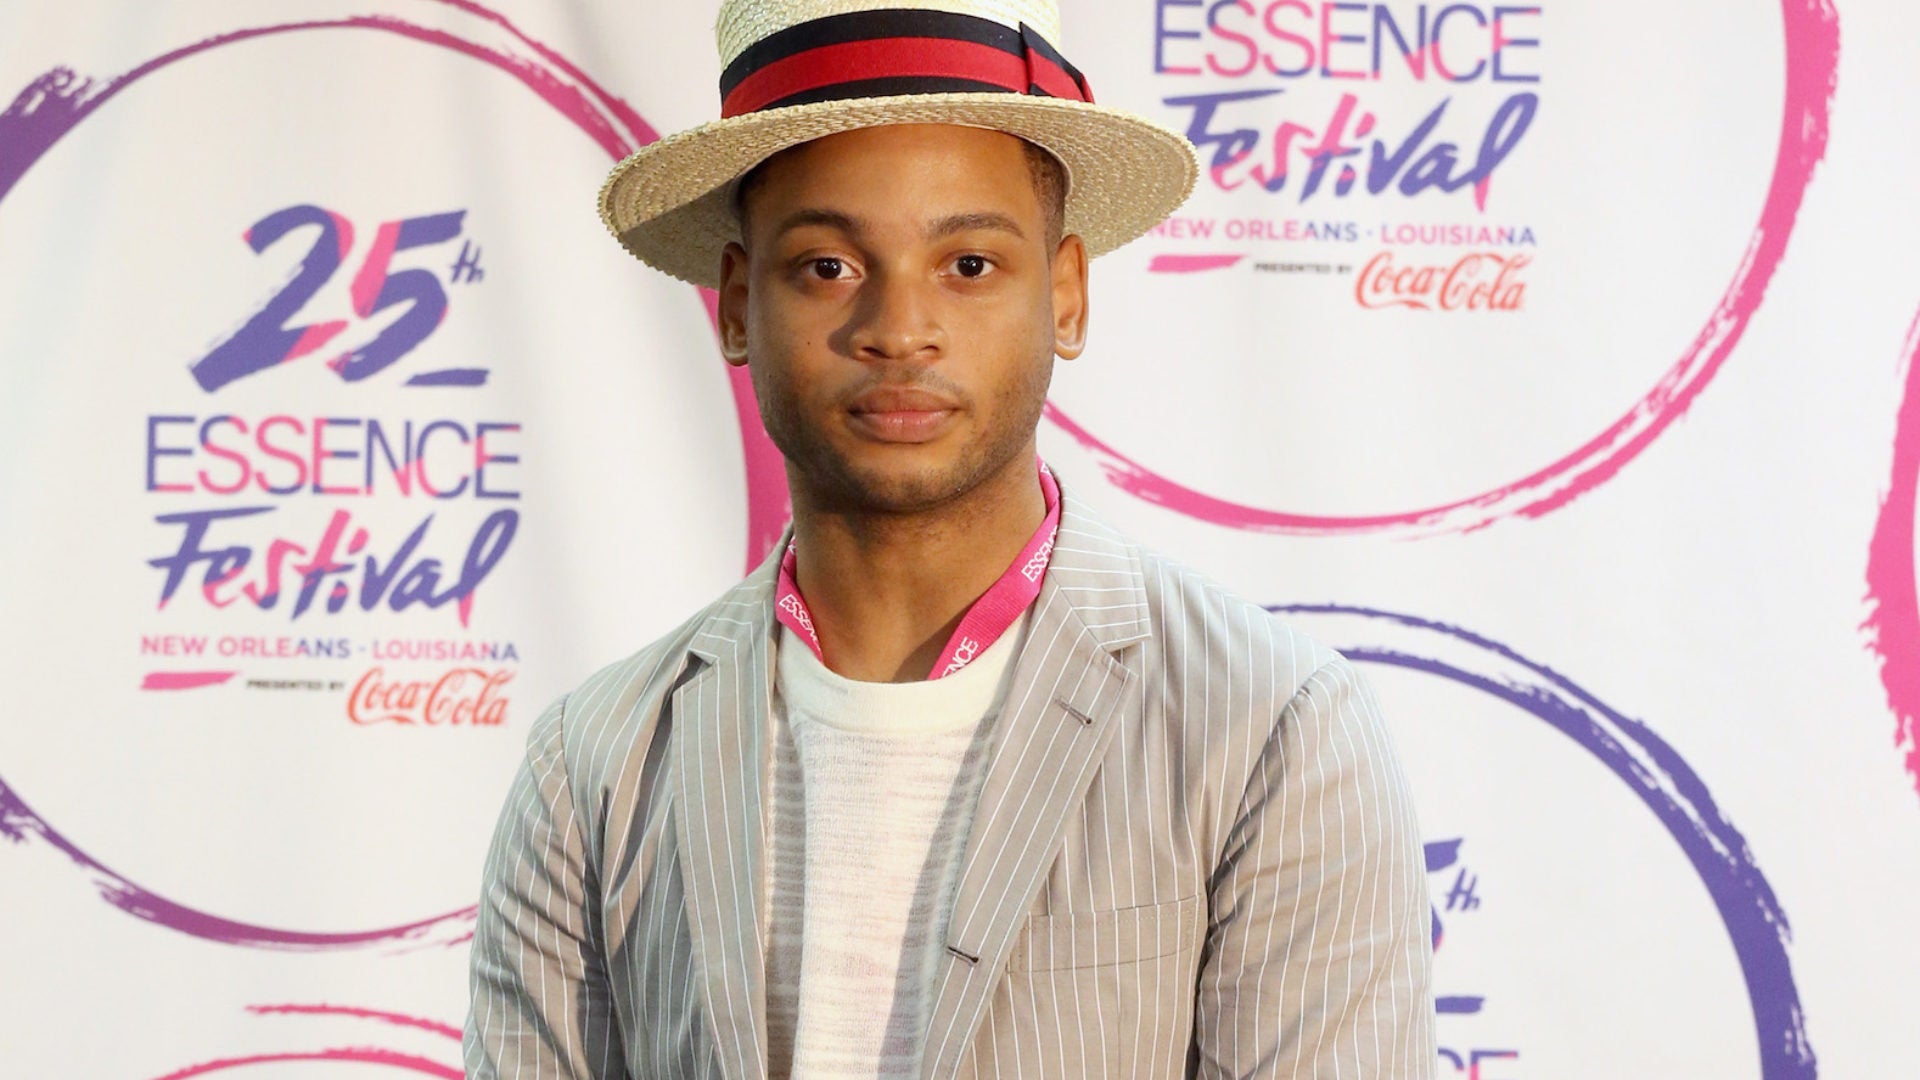 'Pose' Star Ryan Jamaal Swain On His First Essence Fest Experience